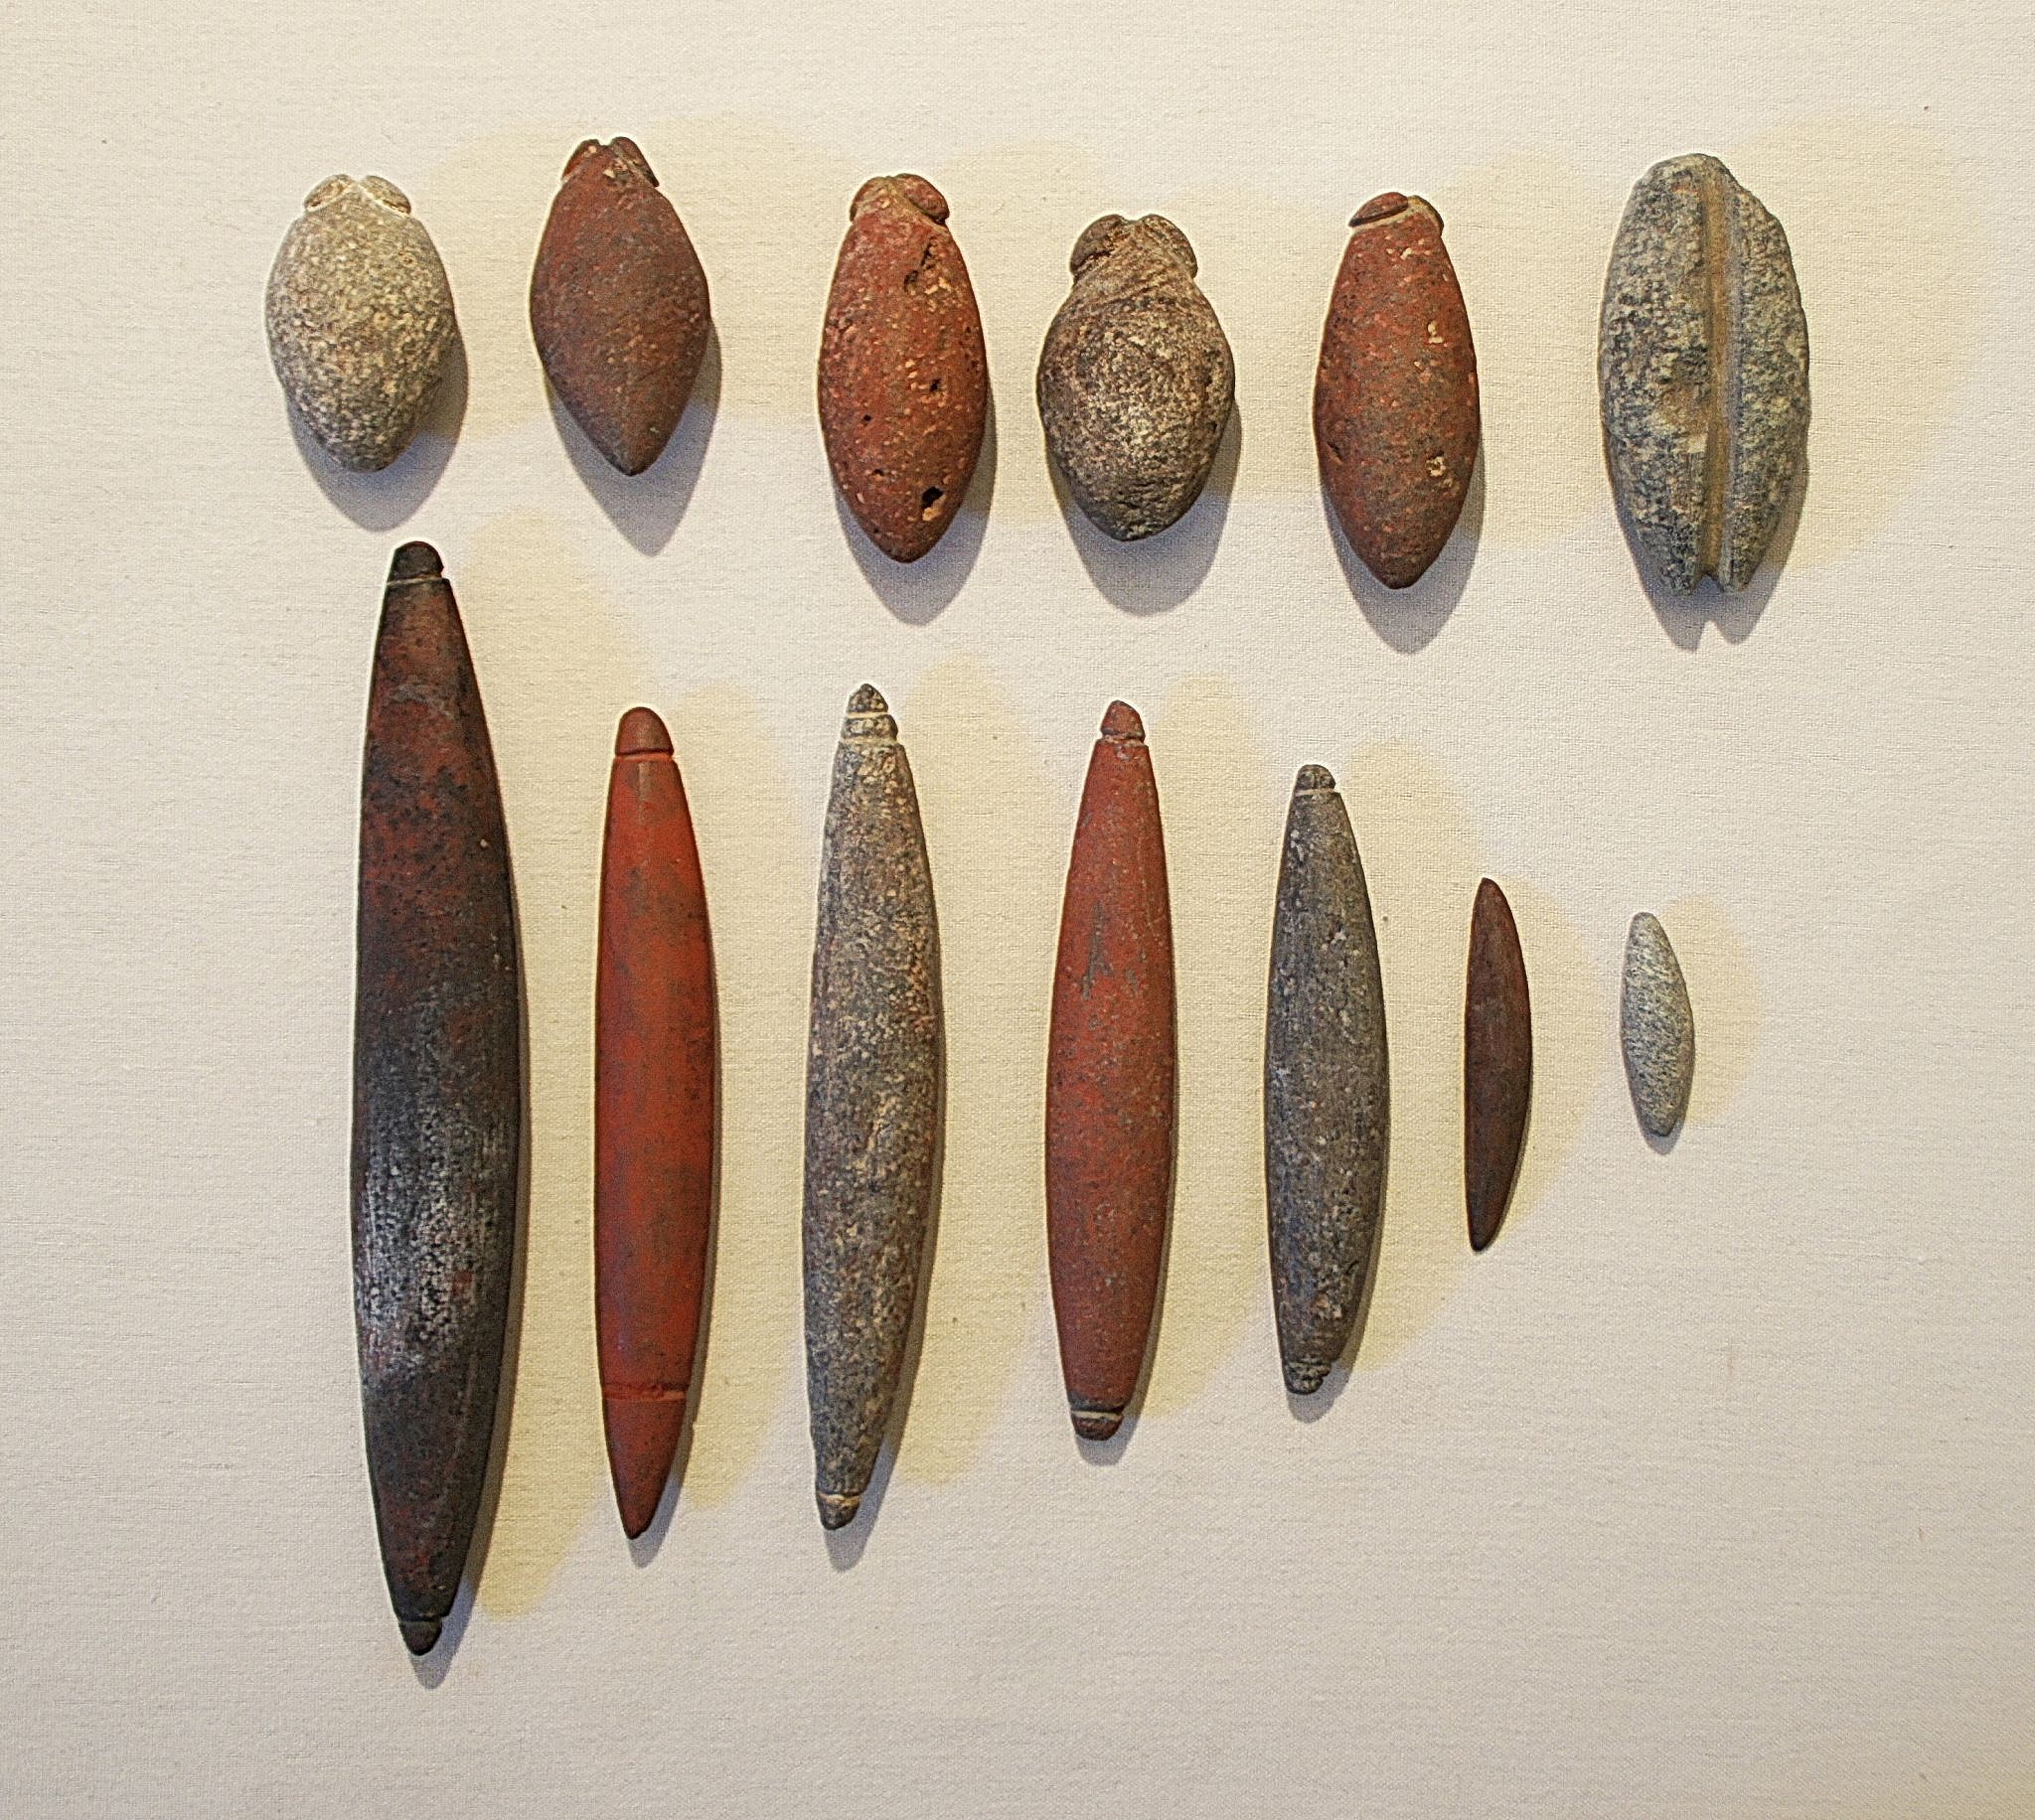 Chile, Thirteen Varied Stone Sinkers
Each sinker has notches at the end to attach to a line.  Different sizes are for different size fish.
Media: Stone
Dimensions: Bulbous sinkers: 1.75" - 3" LOblong sinkers:  1.5"-7" L
n6037